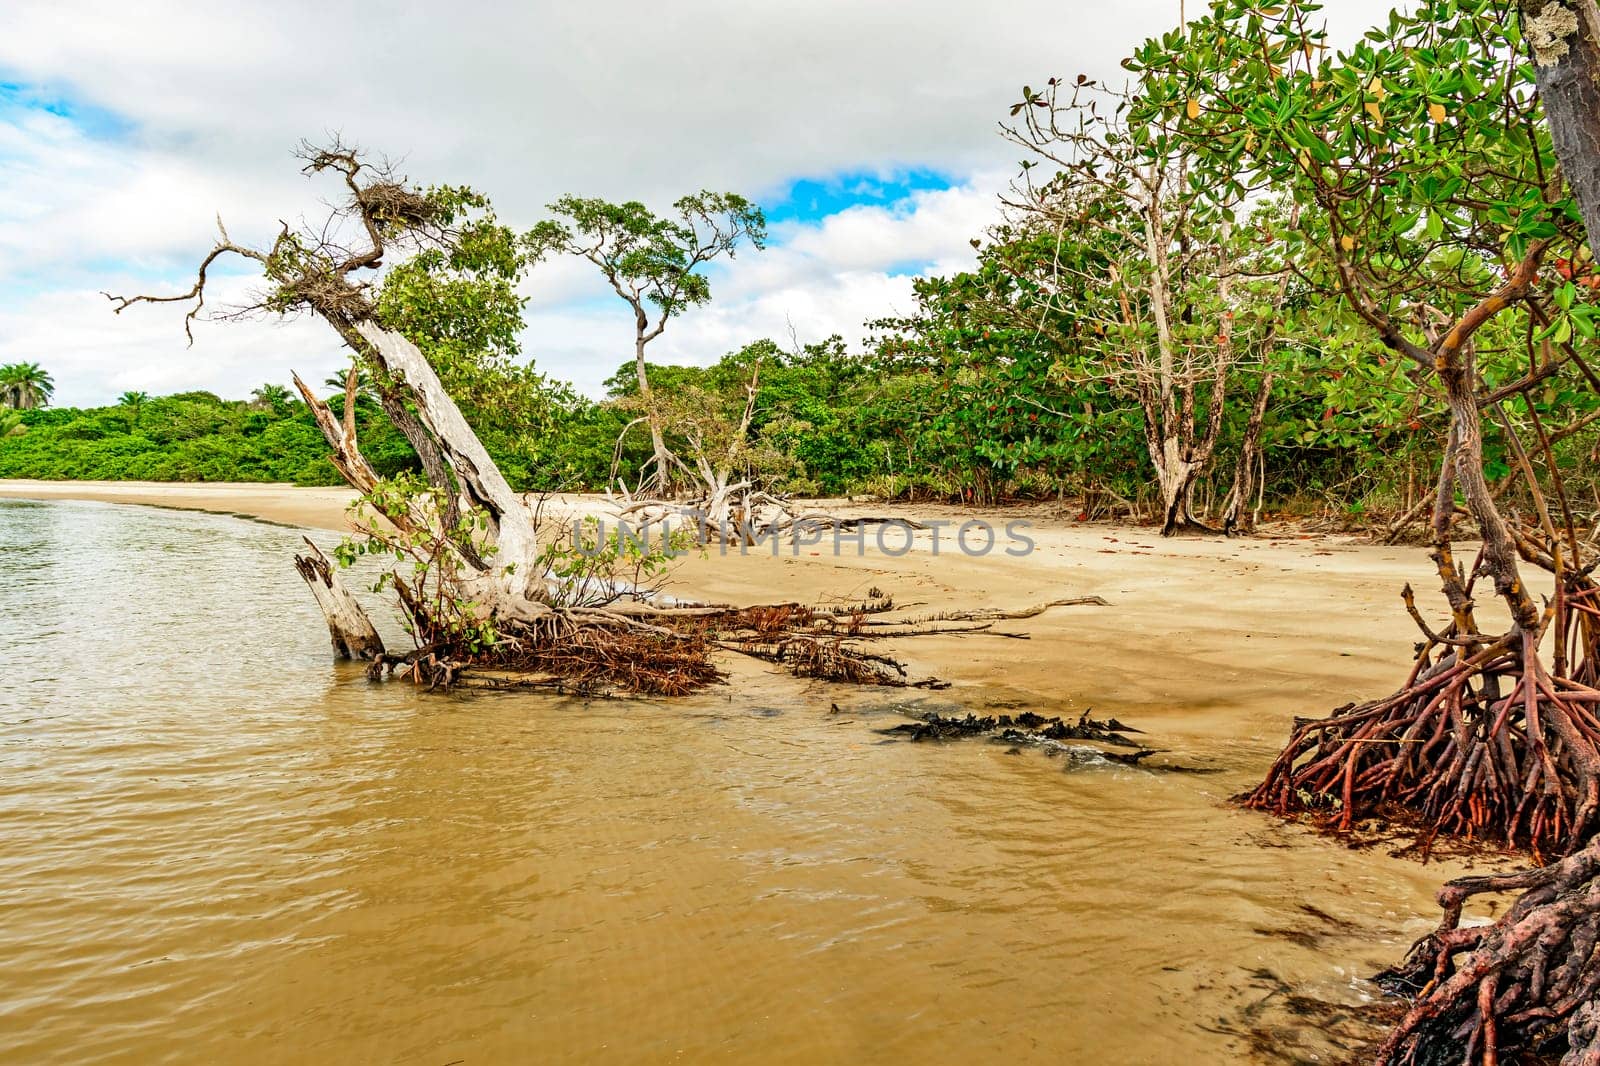 Mangrove vegetation with twisted branches and roots by Fred_Pinheiro